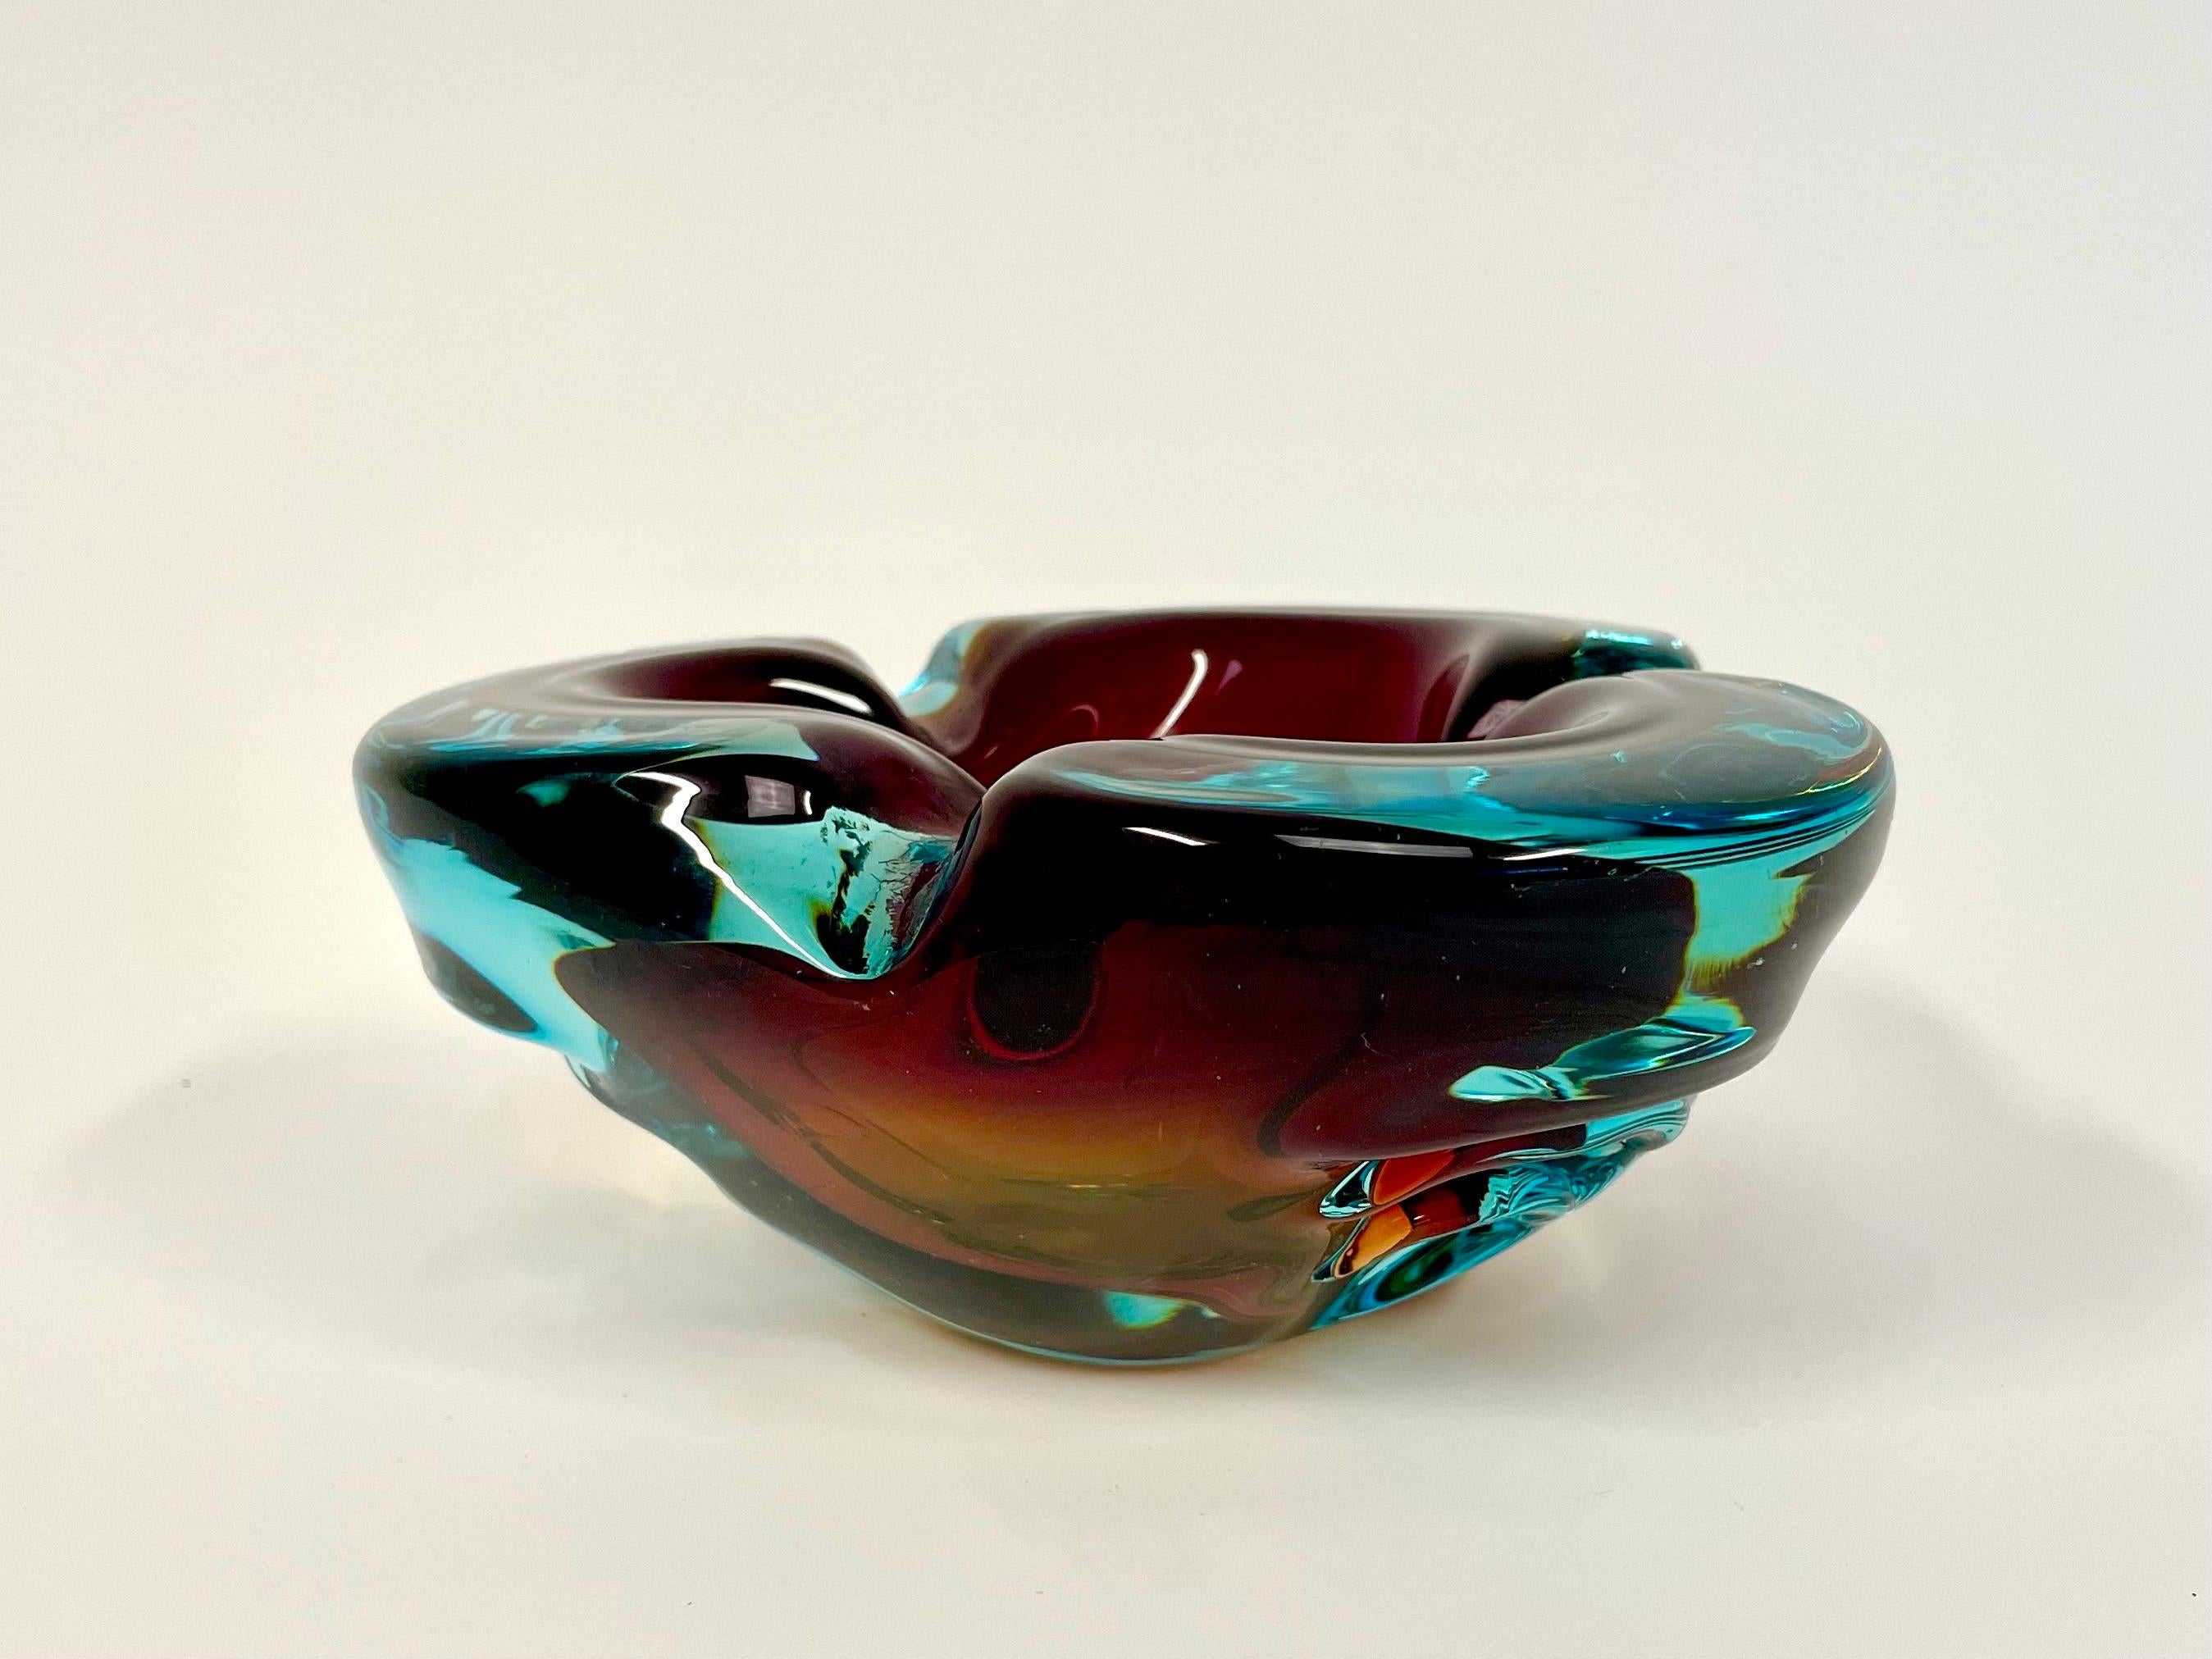 This is the heavy, soft shaped Alfredo Barbini ashtray in art glass. It comes in a musty tricolor variant in Mediterranean blue with elements of burgundy and bottom in amber. 

It has a triangular design with distinct indentations for your cigar in